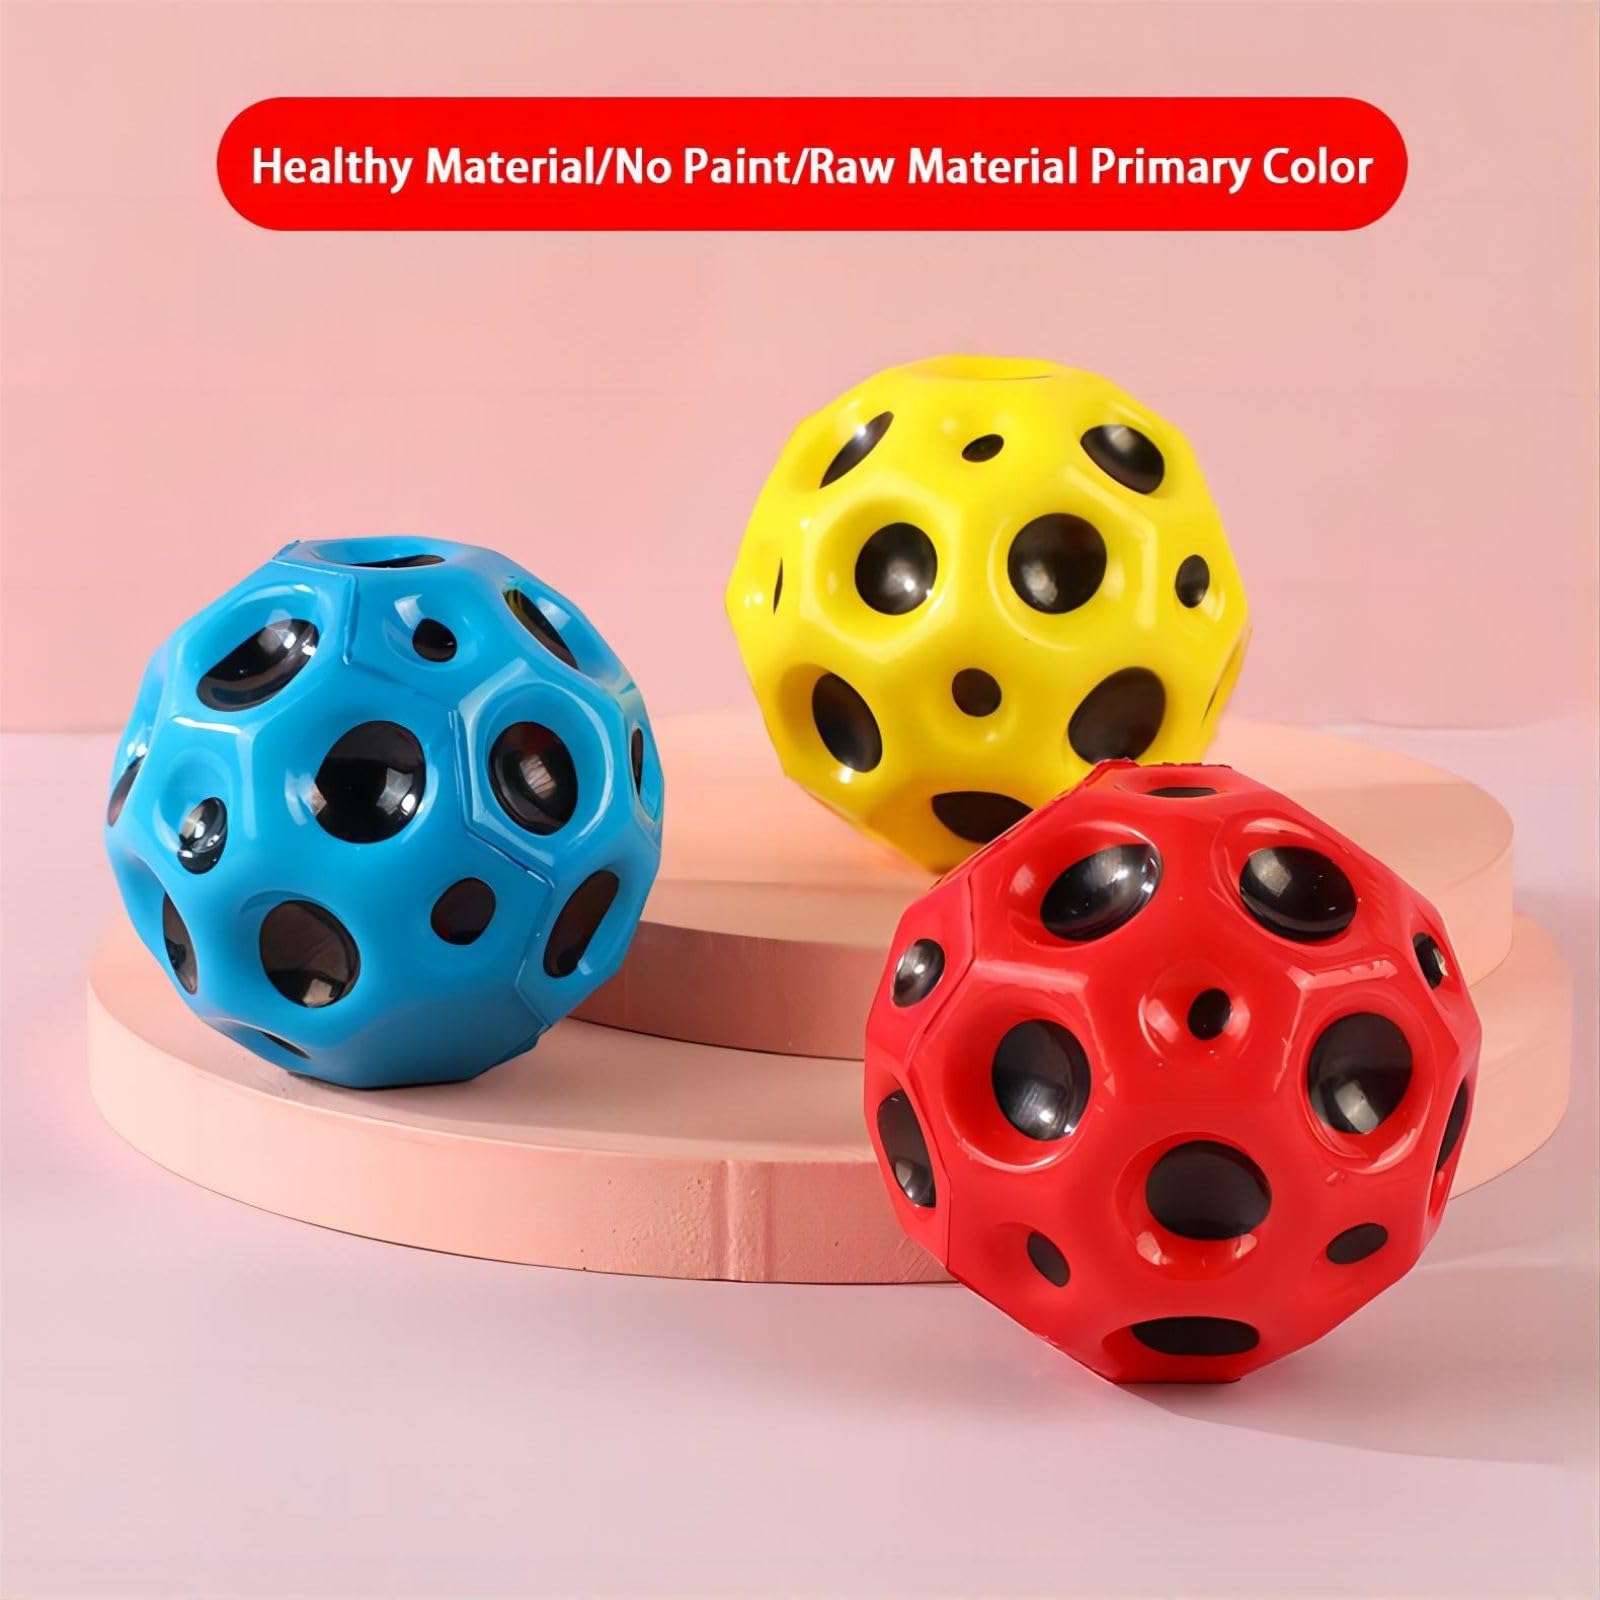 Space Ball - Super High Bouncing Bounciest Lightweight Foam Ball,Improve Hand-Eye Coordination,Easy to Grip and Catch, Which Used by Athletes as a Sport Training Ball,Great Sensory Ball for Kids